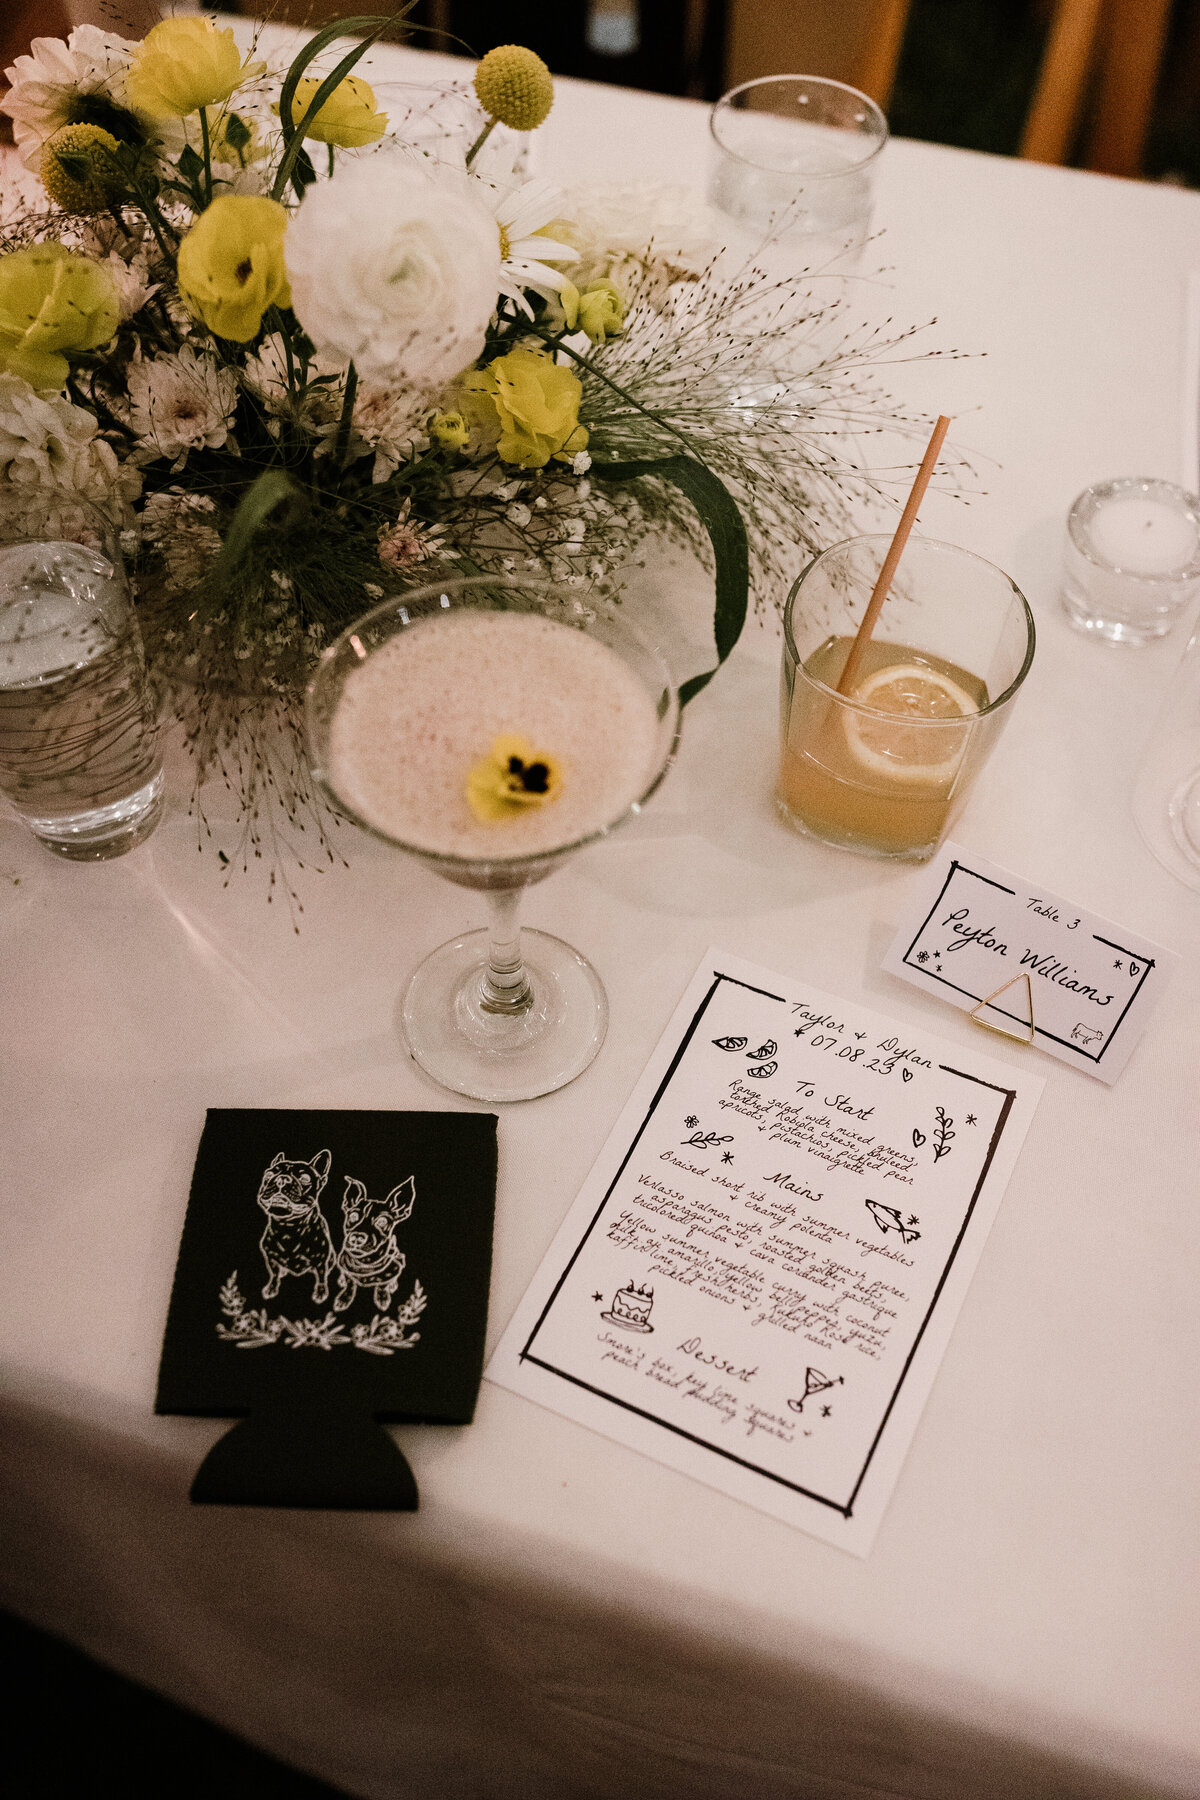 Table with martini, cocktail, menu and florals